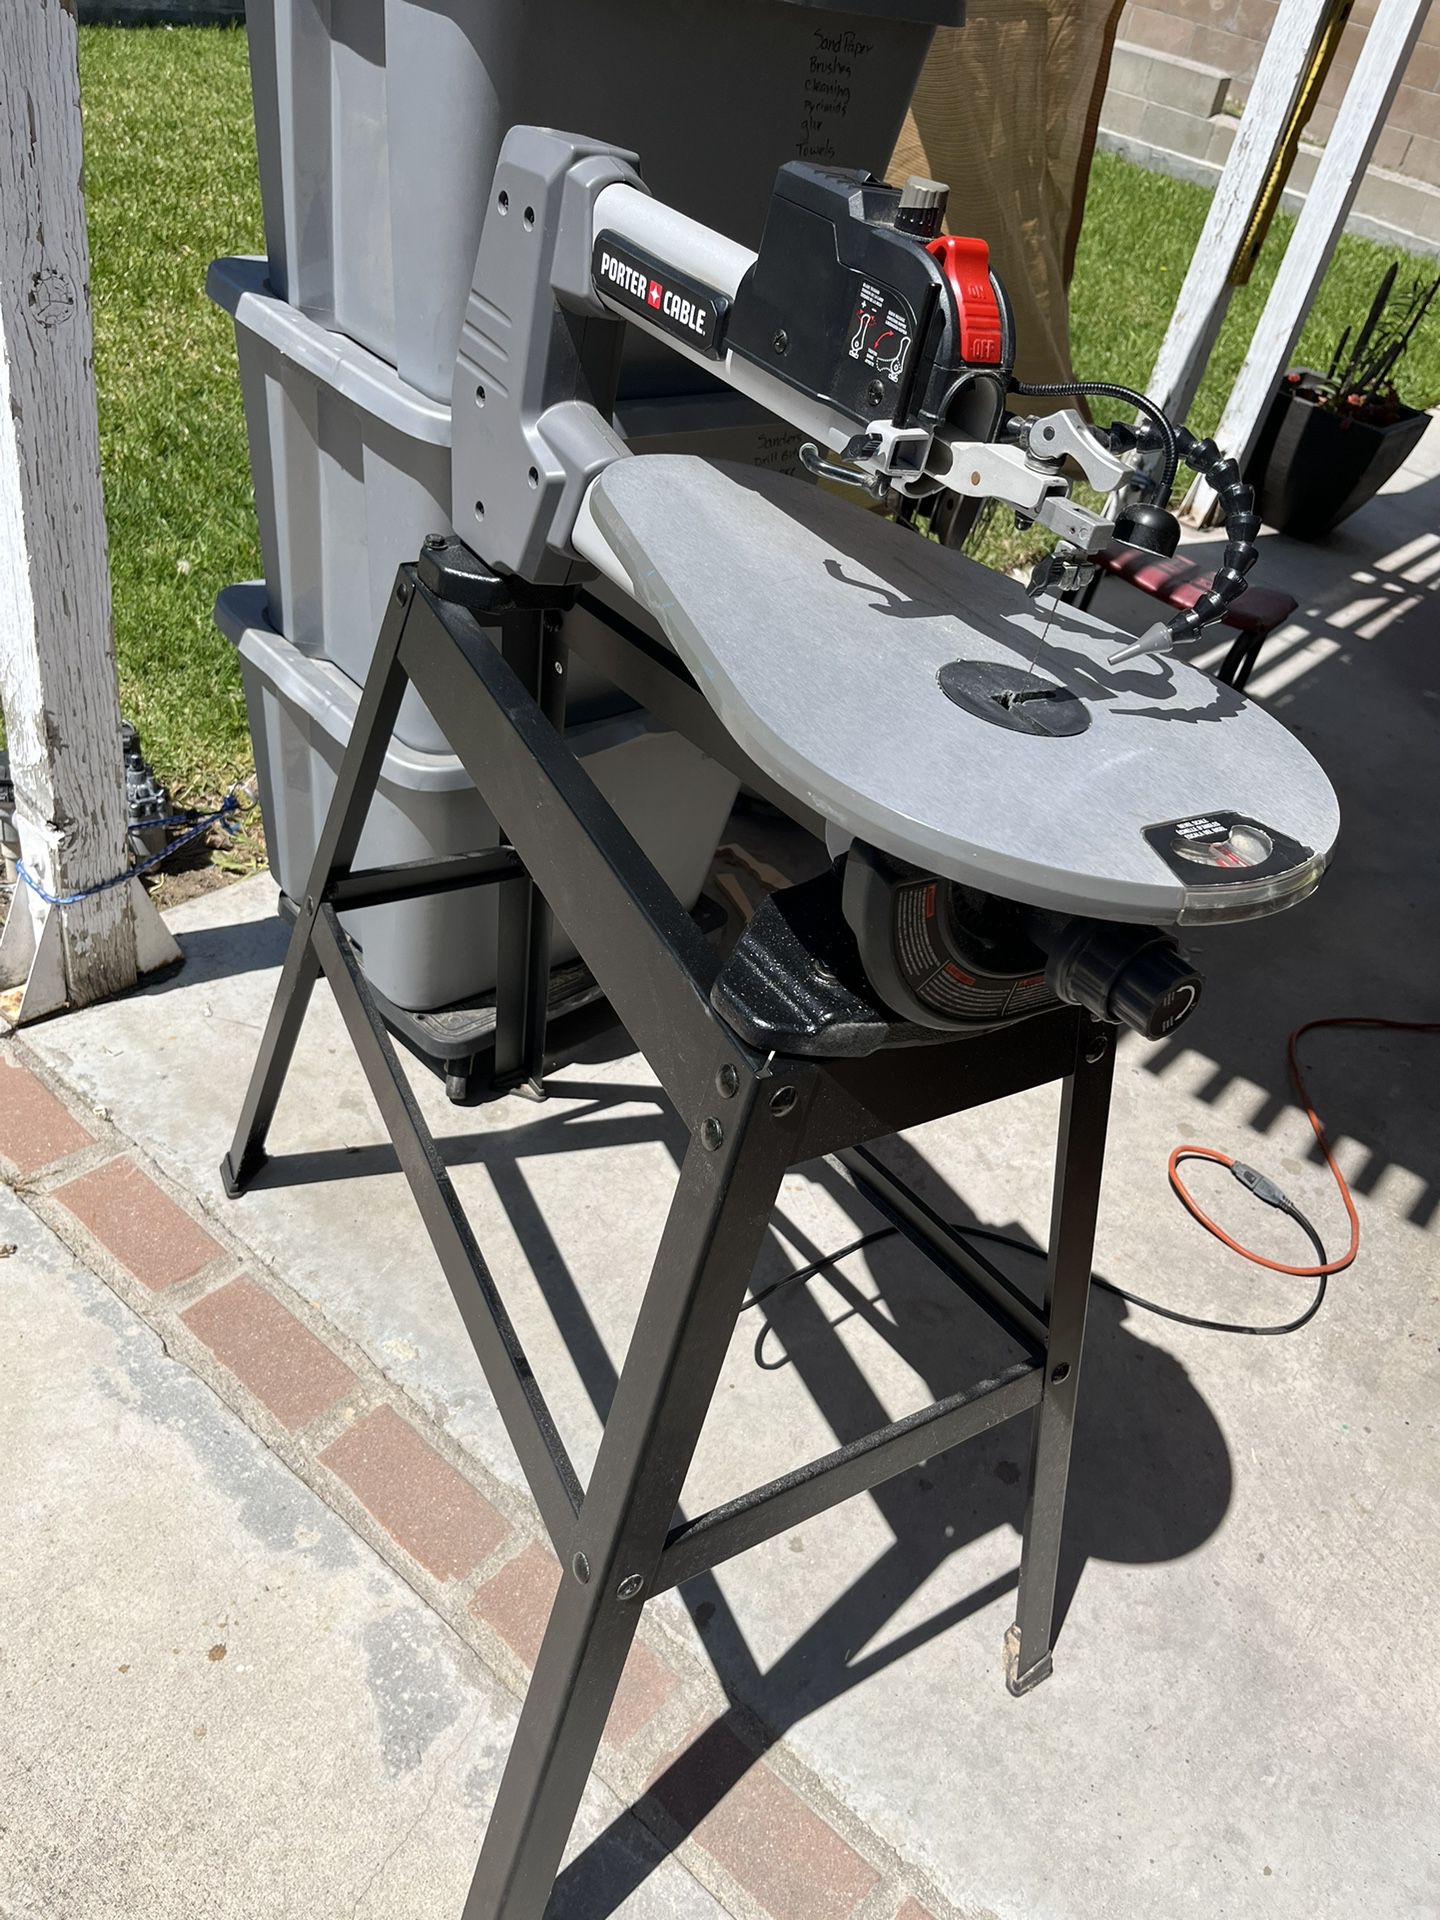 Porter cable Scroll saw